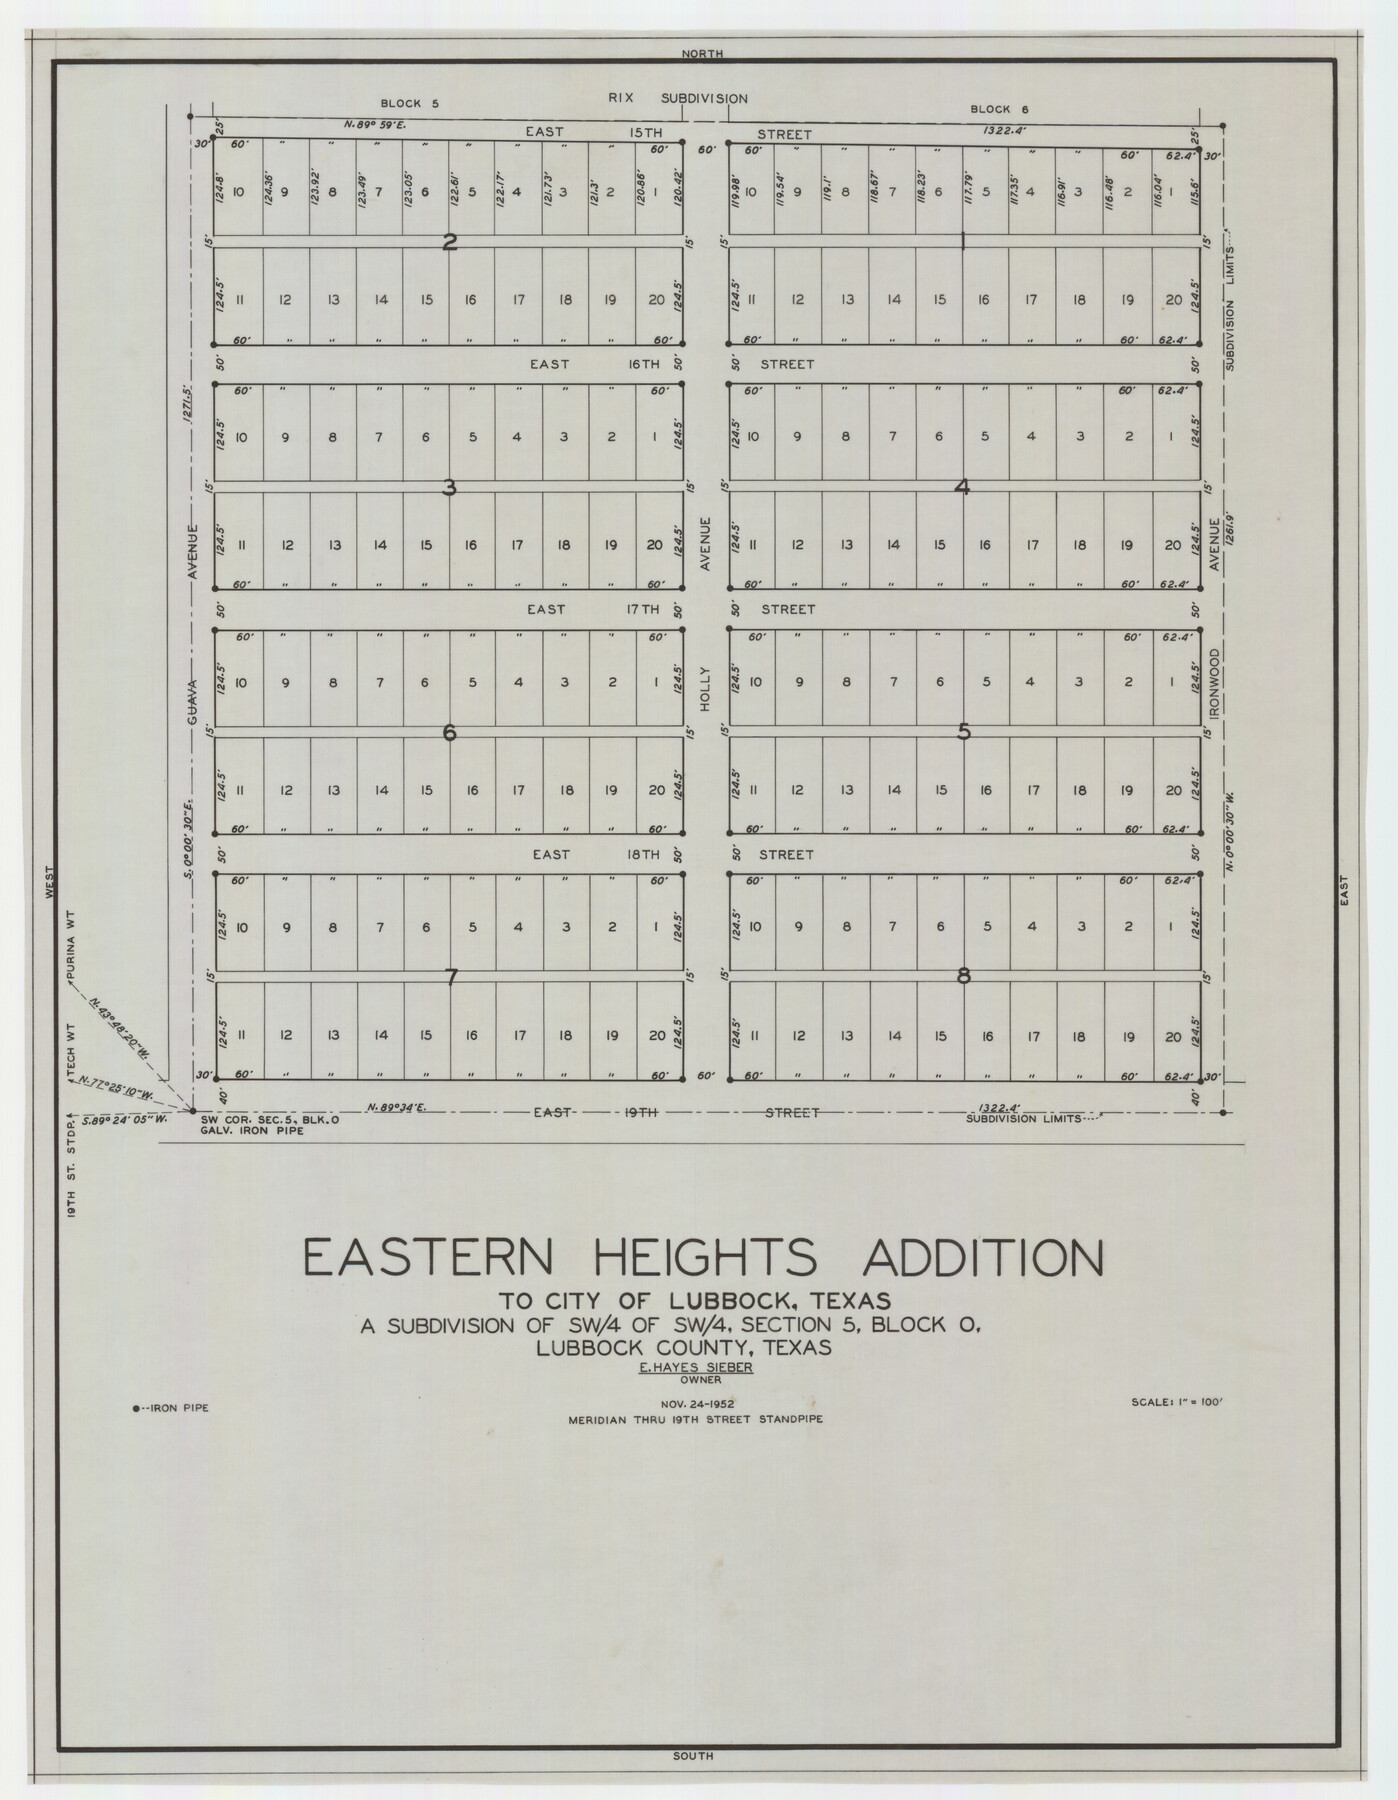 92783, Eastern Heights Addition to City of Lubbock, Texas a Subdivision of SW/4 of SW/4, Section 5, Block O, E. Hayes Sieber,  Owner, Twichell Survey Records